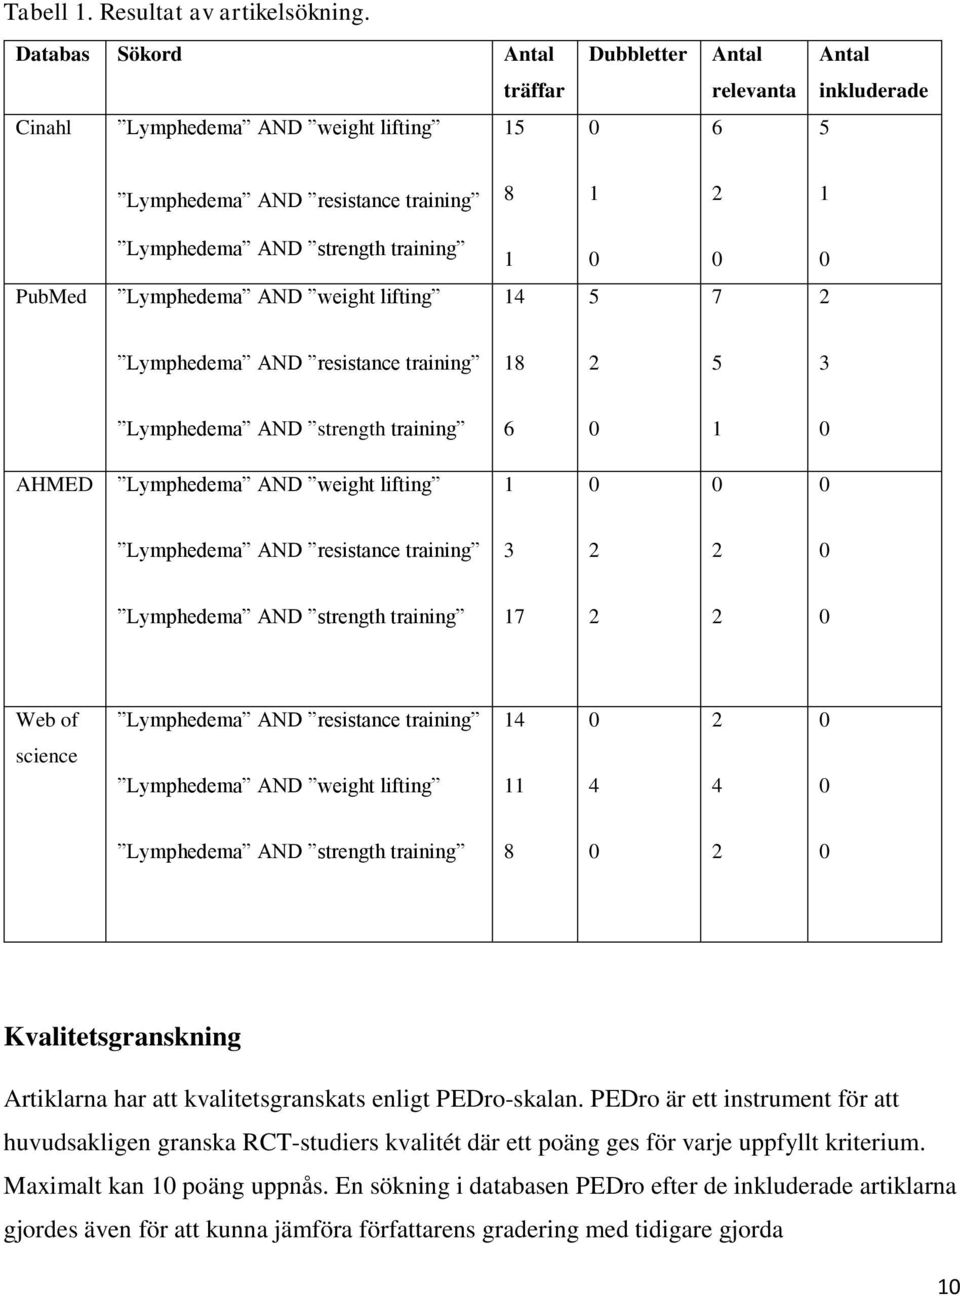 PubMed Lymphedema AND weight lifting 14 5 7 2 Lymphedema AND resistance training 18 2 5 3 Lymphedema AND strength training 6 1 AHMED Lymphedema AND weight lifting 1 Lymphedema AND resistance training